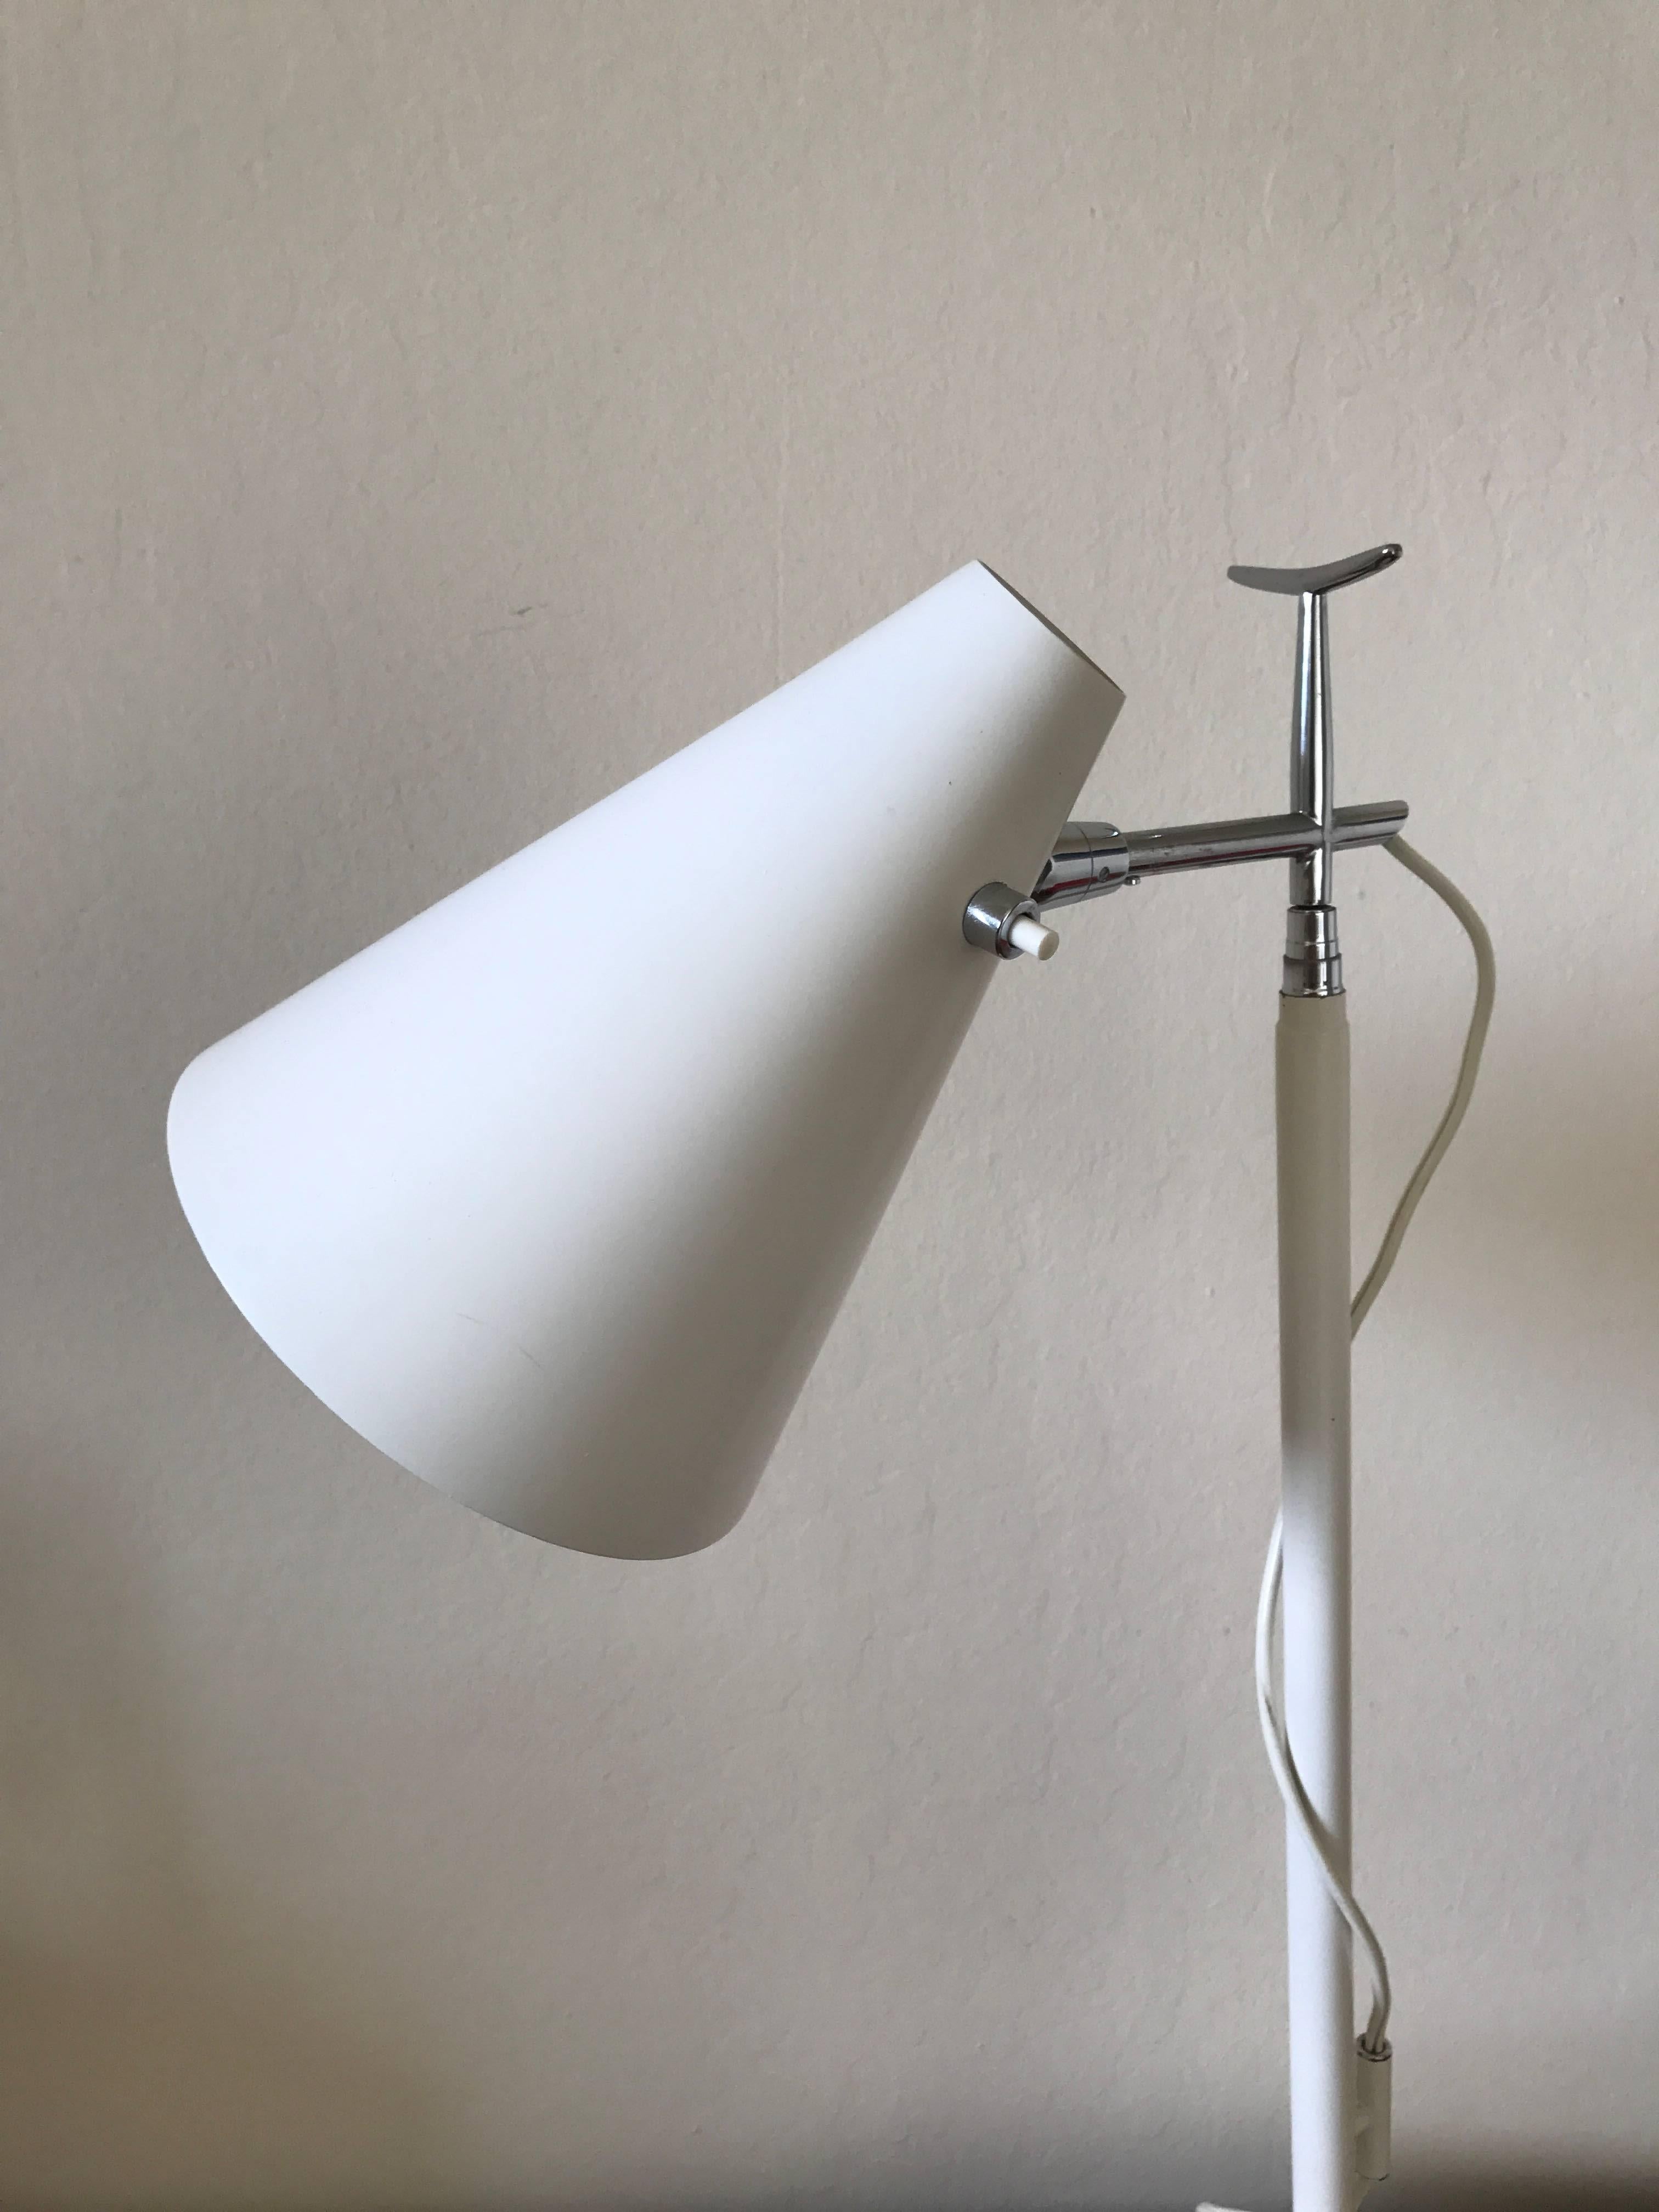 Telescoping table or floor lamp by Ostuni-O-Luce of Italy. The lamp extends from 23